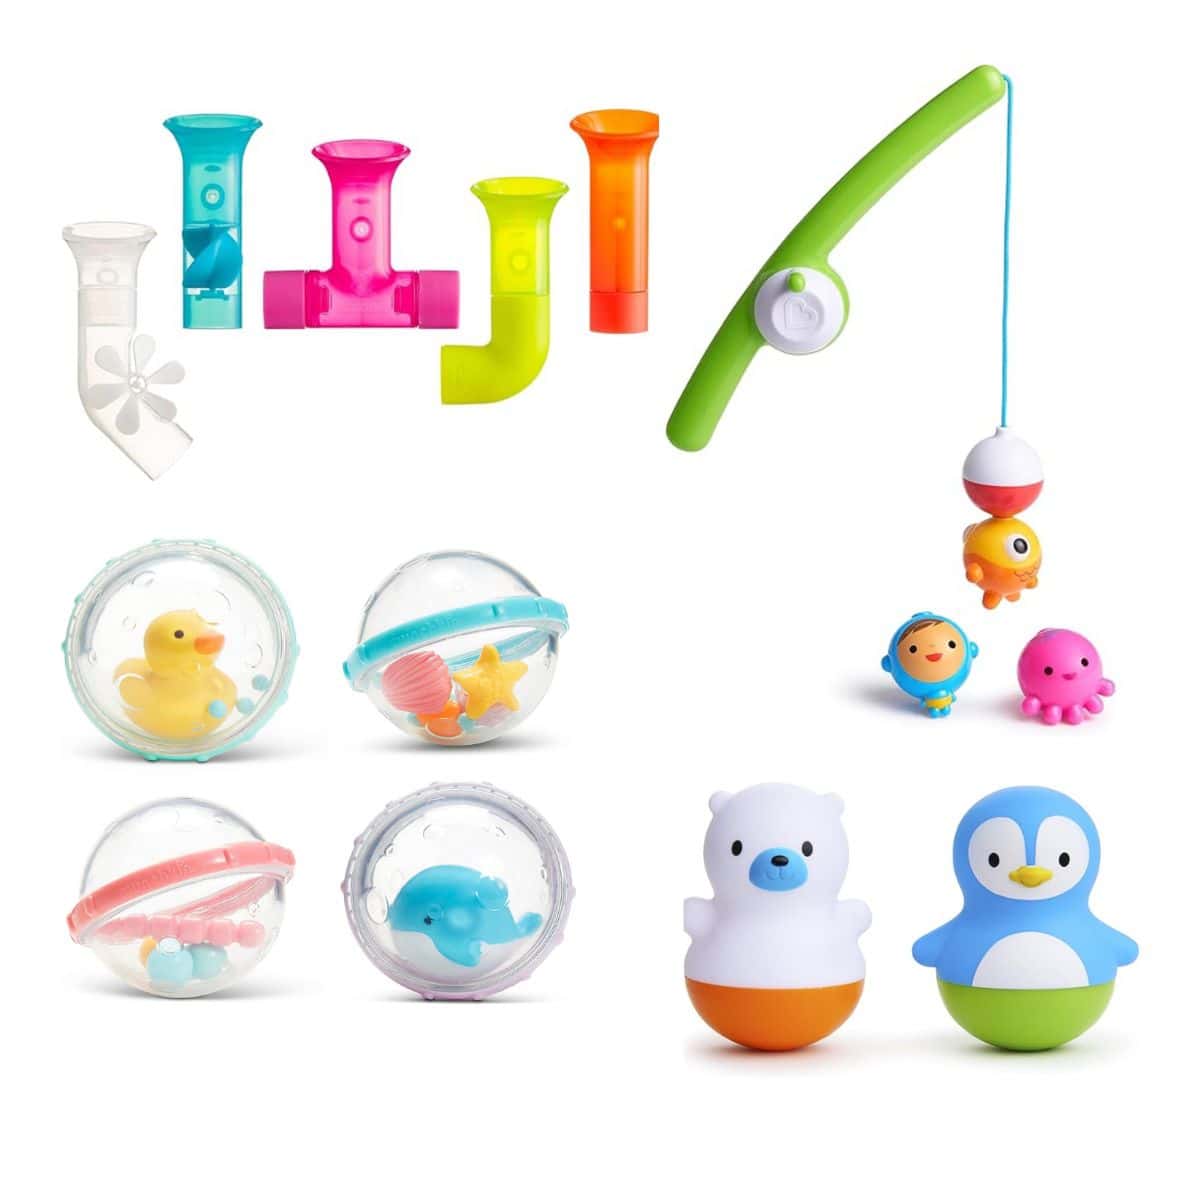 A collage of favorite bathtime stocking stuffers for babies and toddlers.